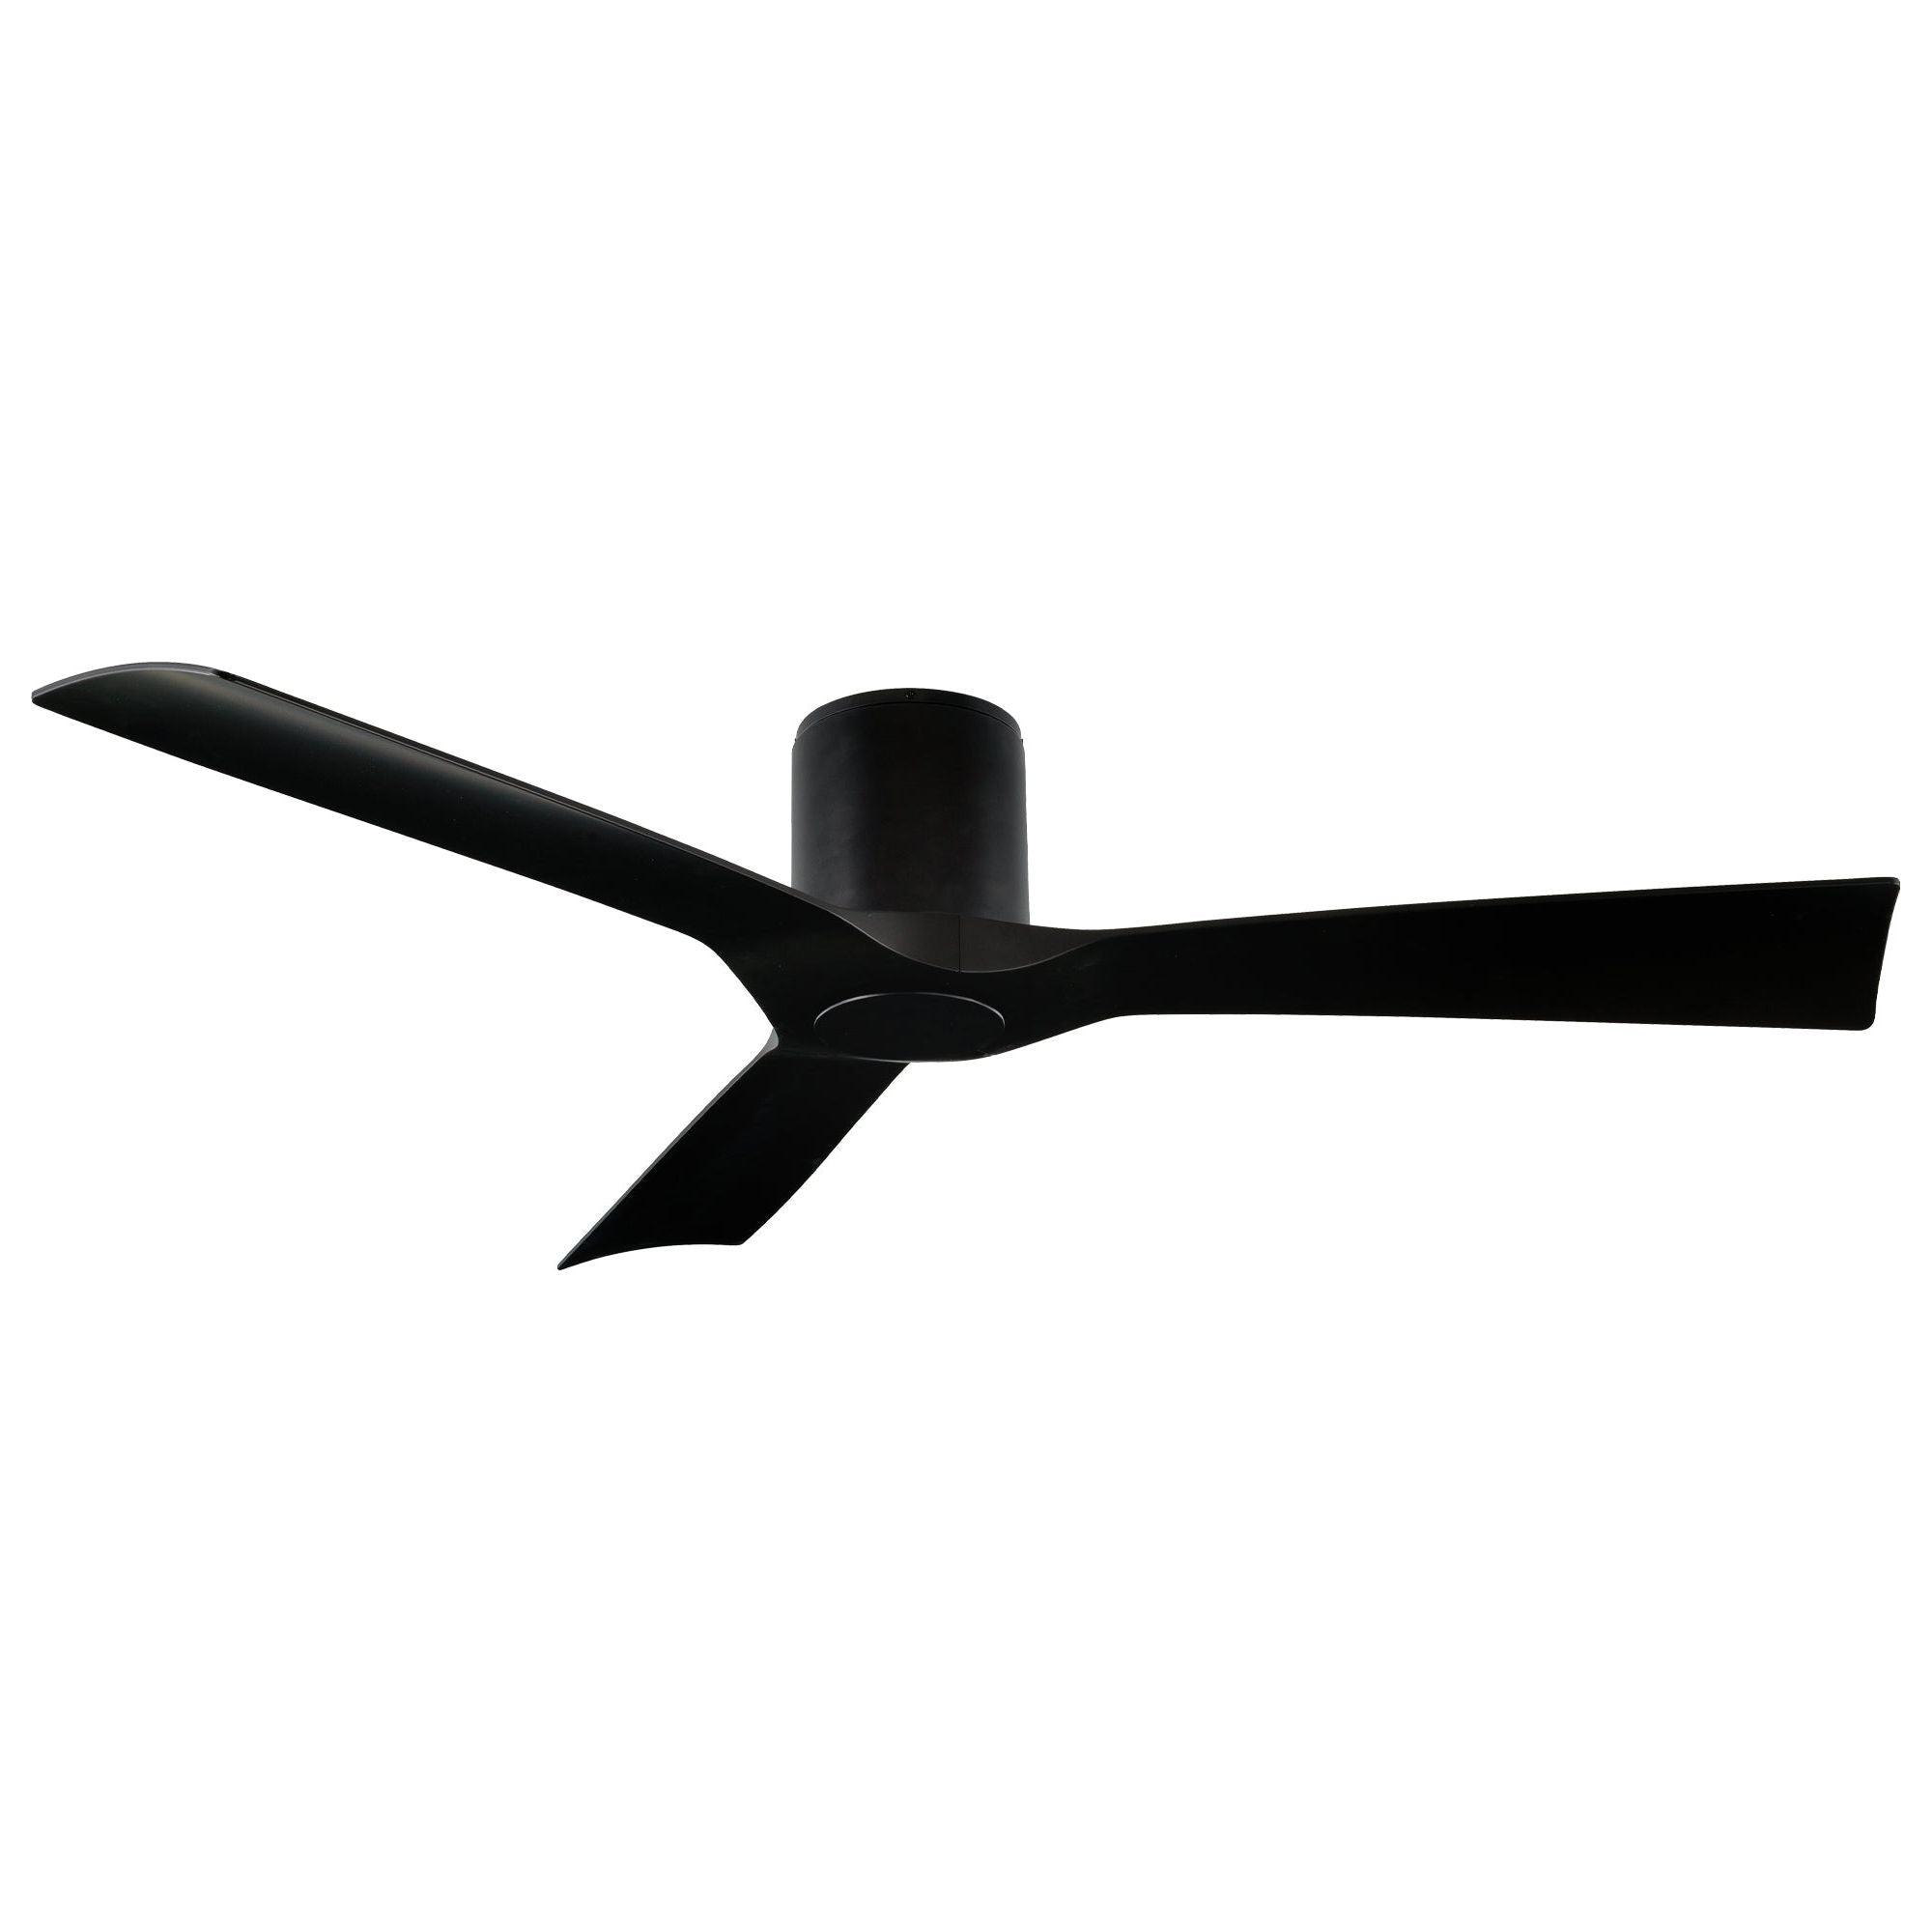 Modern Forms - Aviator Indoor/Outdoor 3-Blade 54" Smart Flush Mount Ceiling Fan with Remote Control - Lights Canada